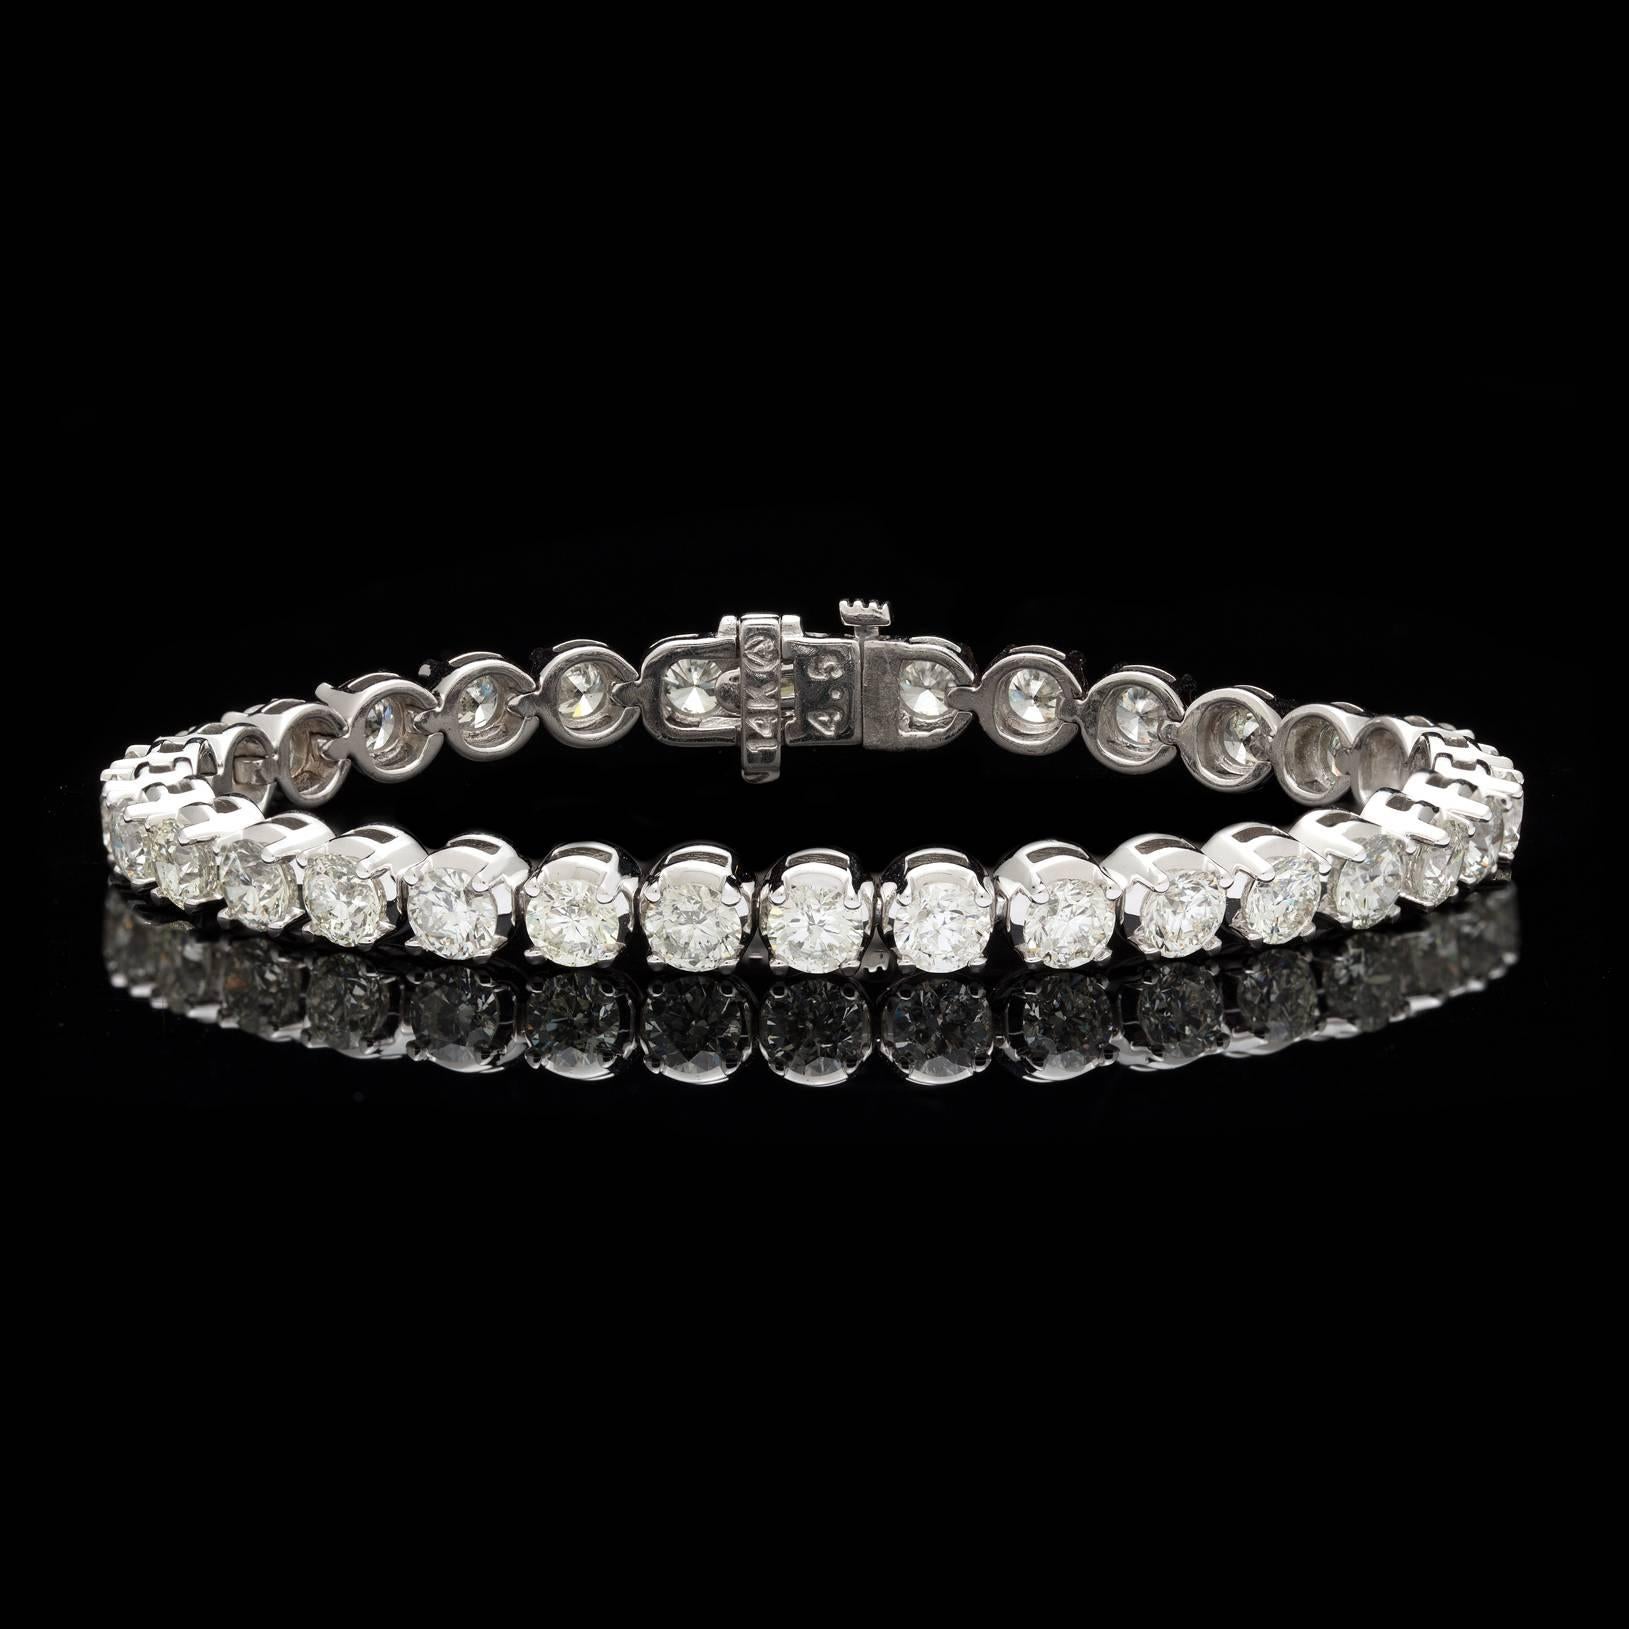 Impressive Diamond Tennis Bracelet featuring 32 fine Round Brilliant Cut Diamonds for a total weight of 12.70 carats. The diamond have phenomenal sparkle and fire, averaging H/I color and SI clarity. At 20.9 grams this 14kt White Gold beauty has